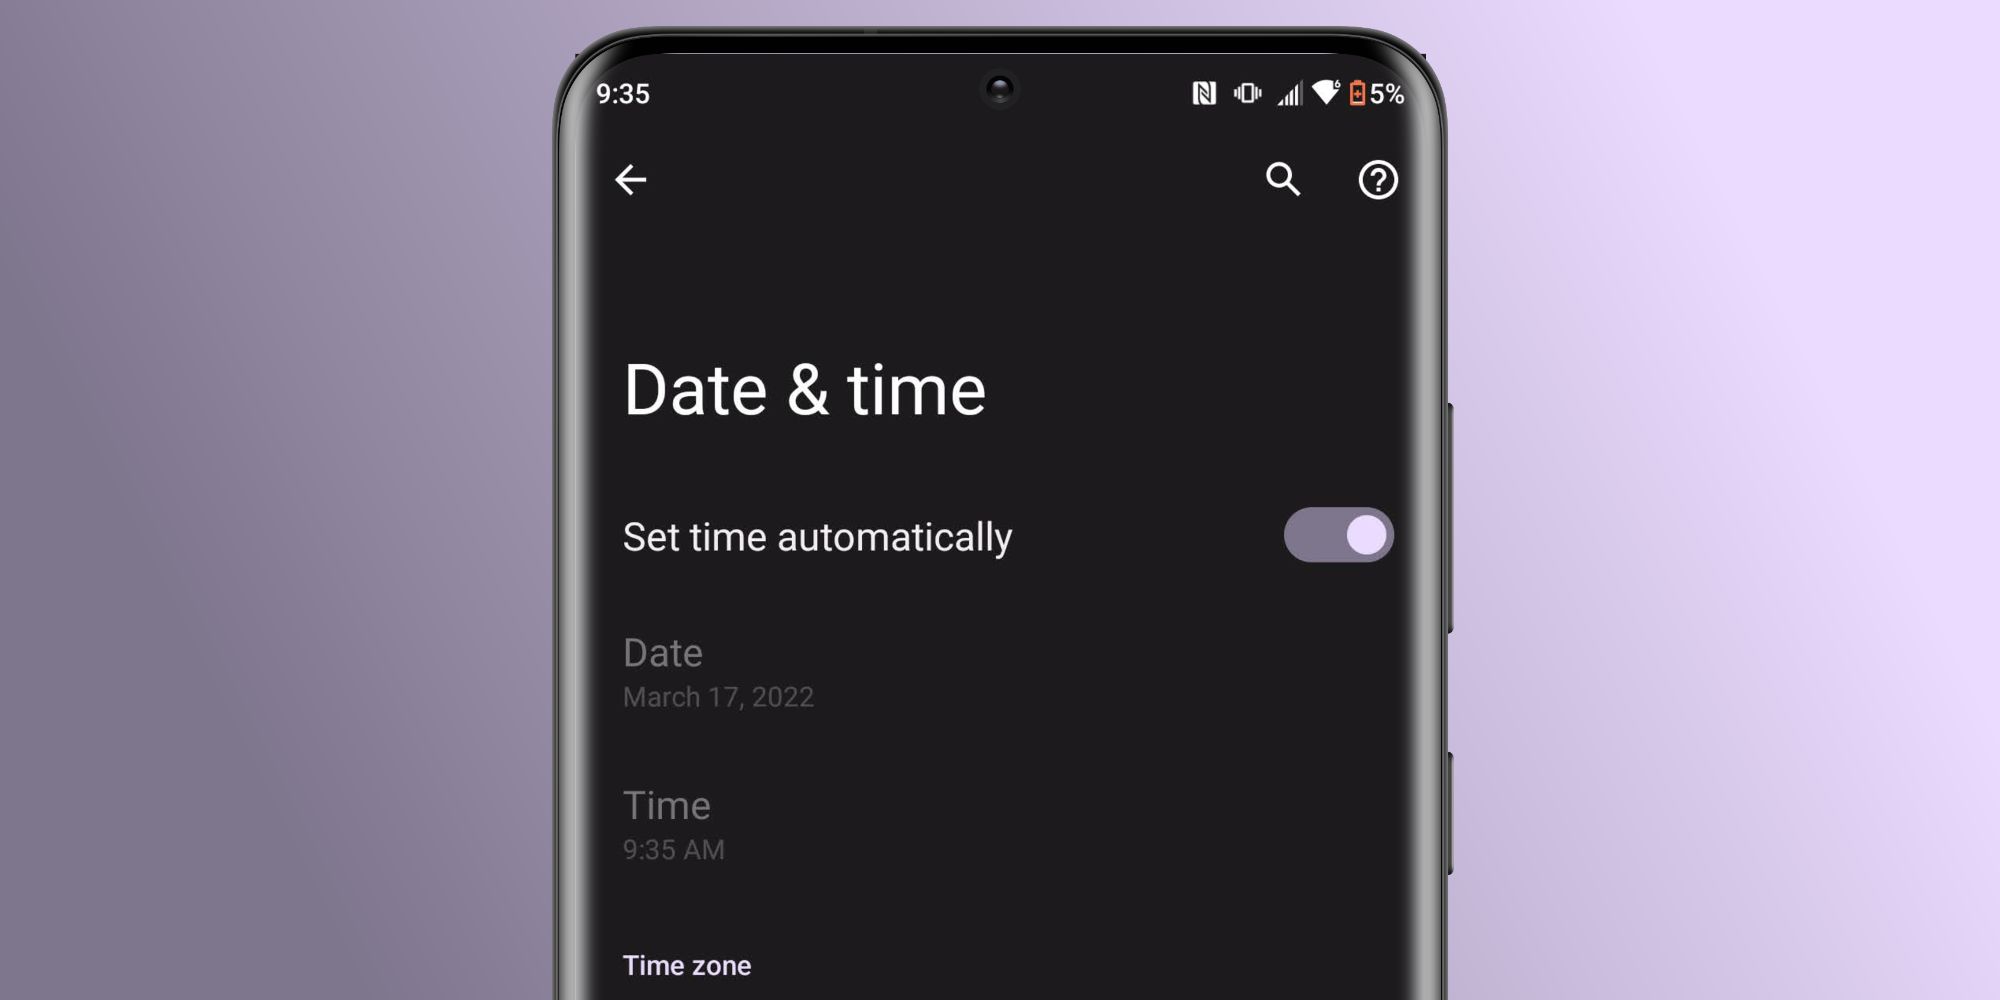 How To Change The Time On Your Android Phone (Automatically & Manually)